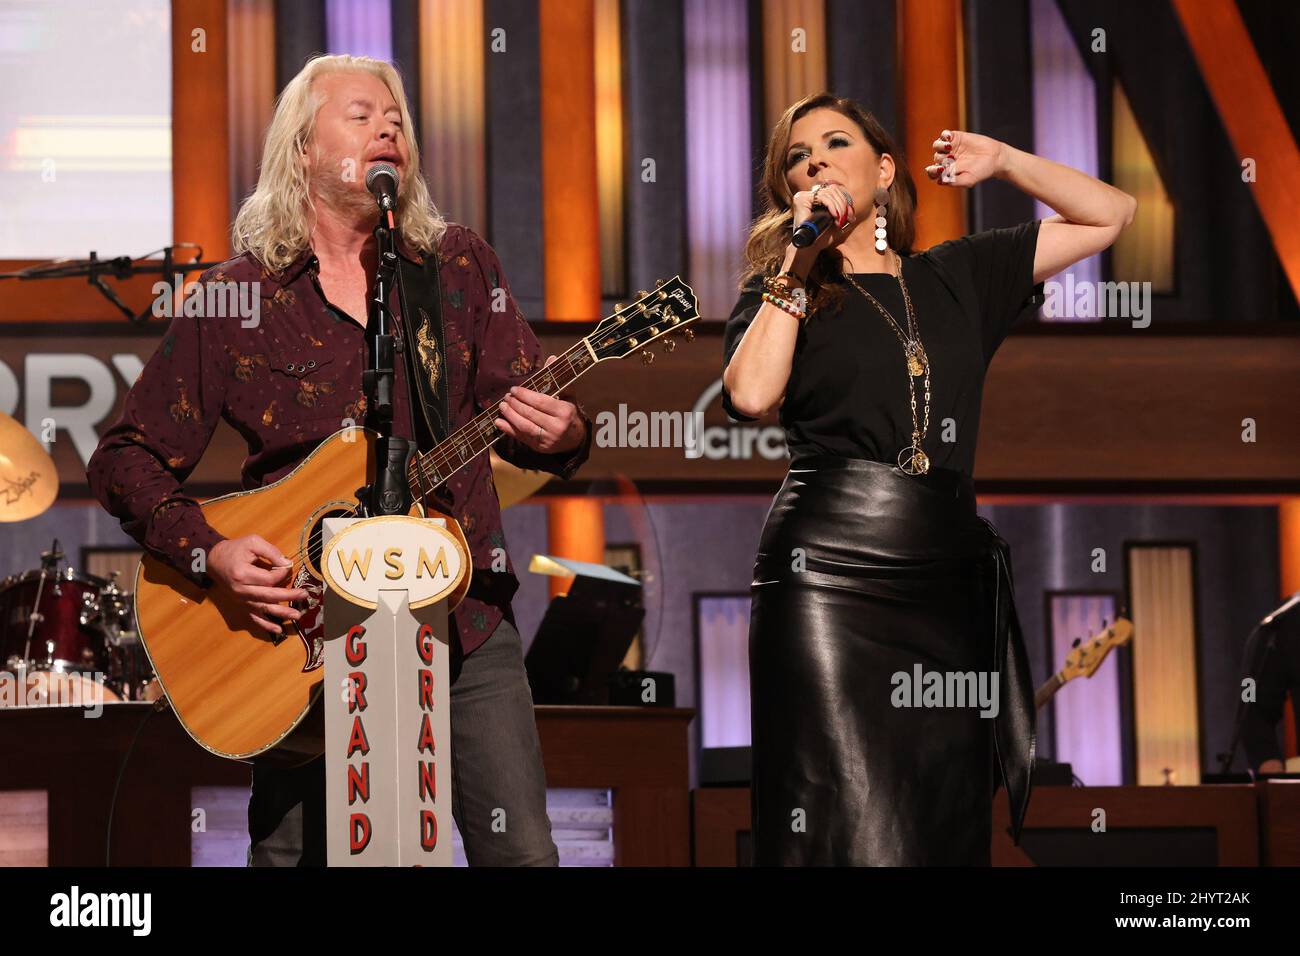 Phillip Sweet and Karen Fairchild of Little Big Town performing onstage at Loretta Lynn's Friends: Hometown Rising benefit concert with proceeds benefiting the United Way of Humphreys County on September 13, 2021 in Nashville, TN. Stock Photo